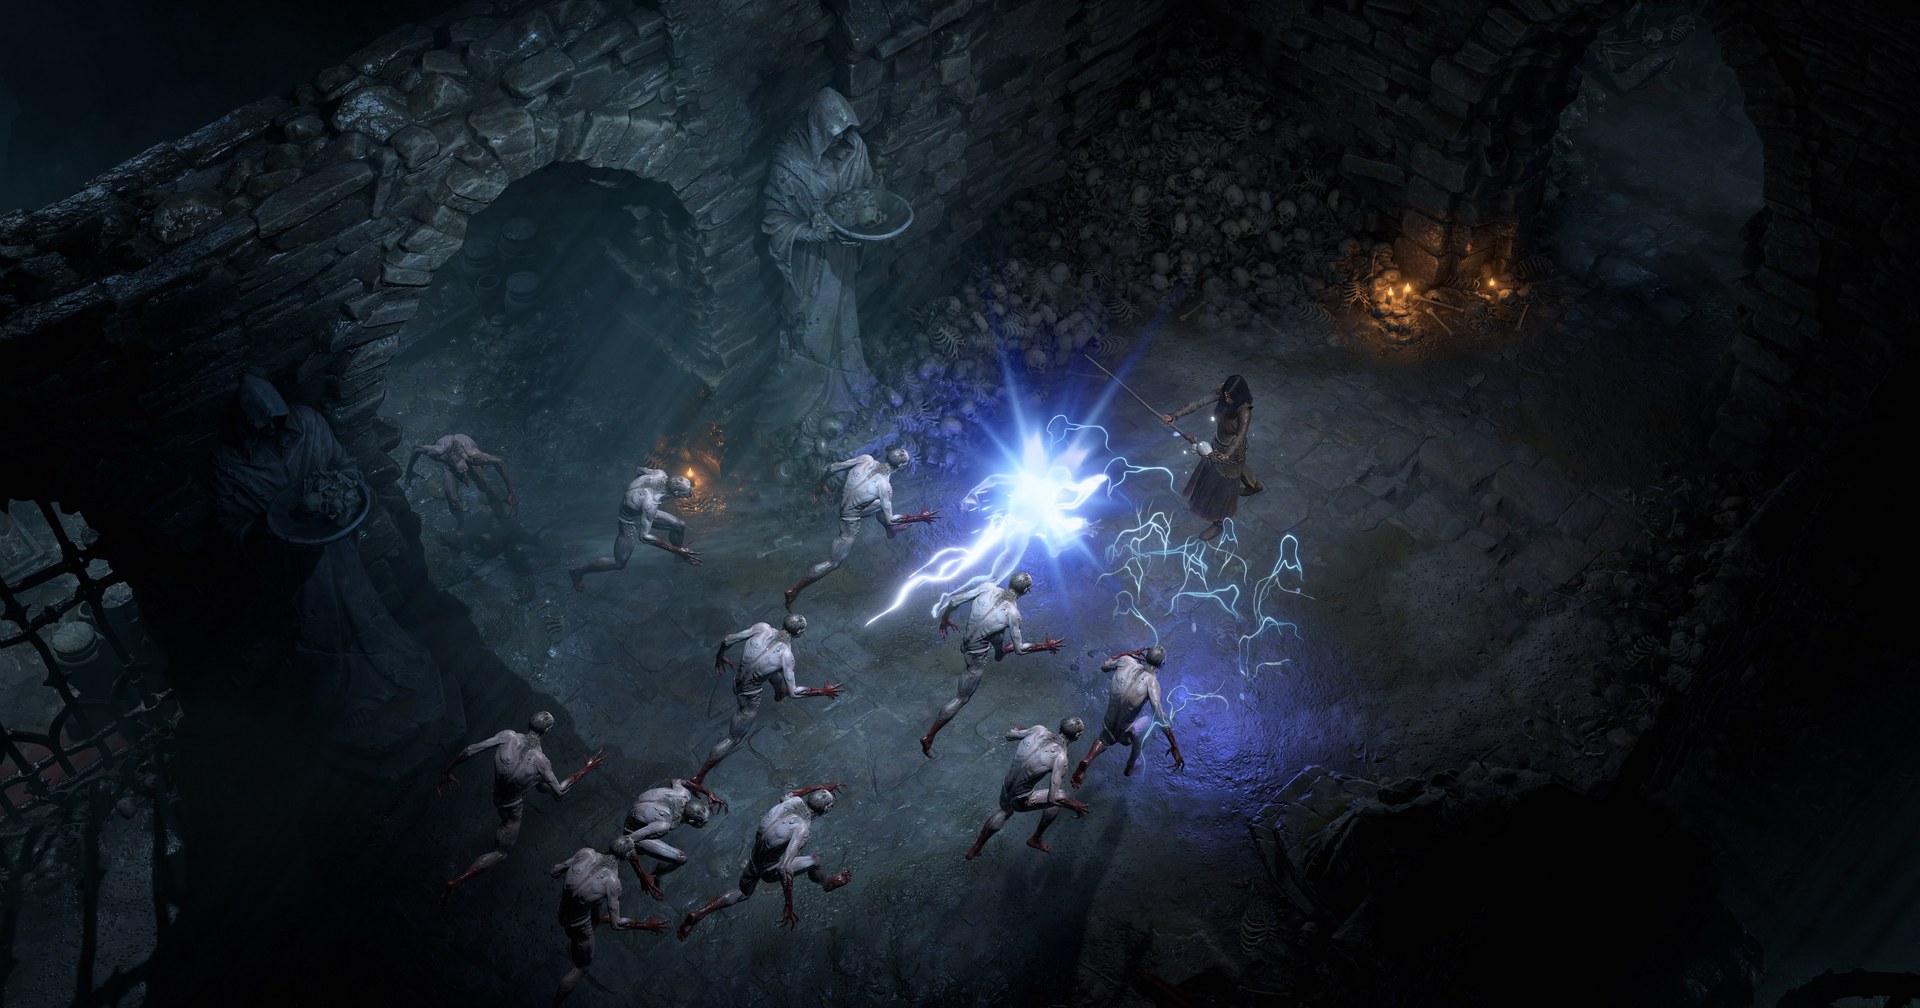 A sorceress in Diablo 4 shoots blue lightning at enemies in a dungeon during the beta server slam.